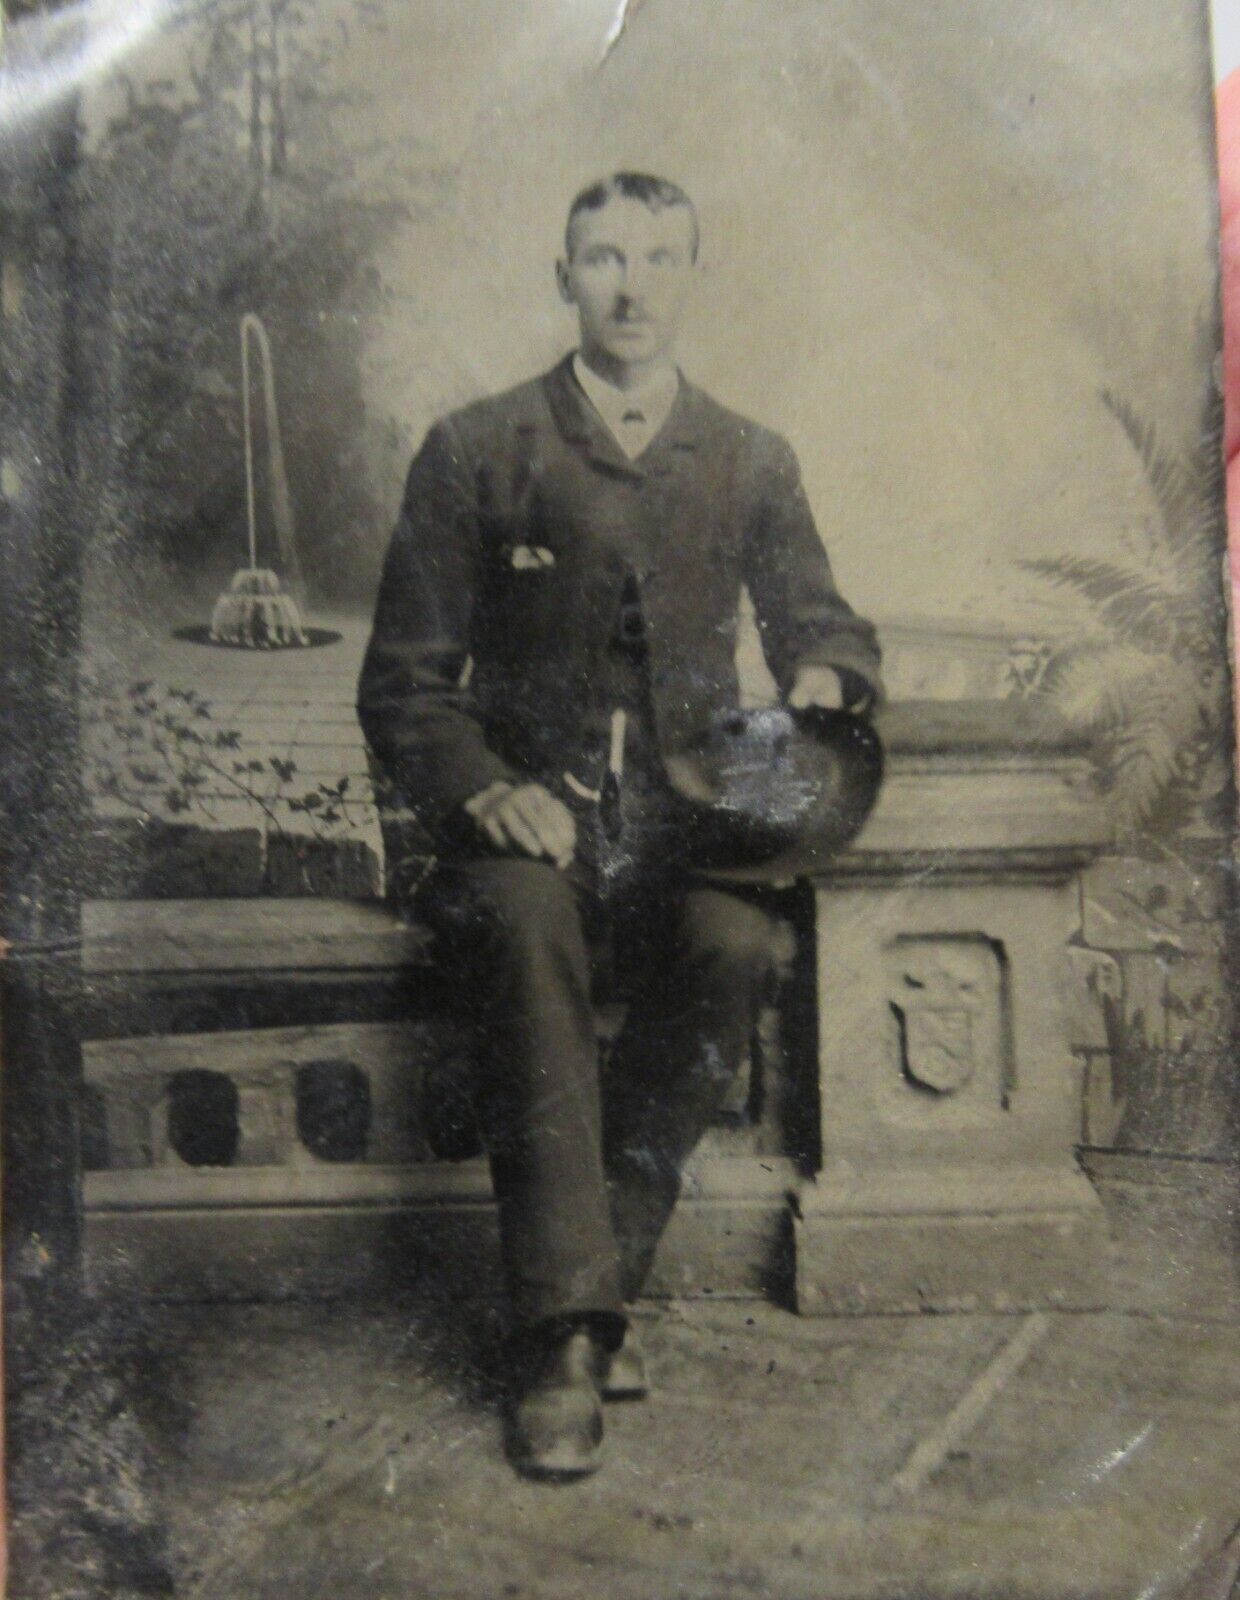 YOUNG MAN - seated - TIN TYPE - listing # 938